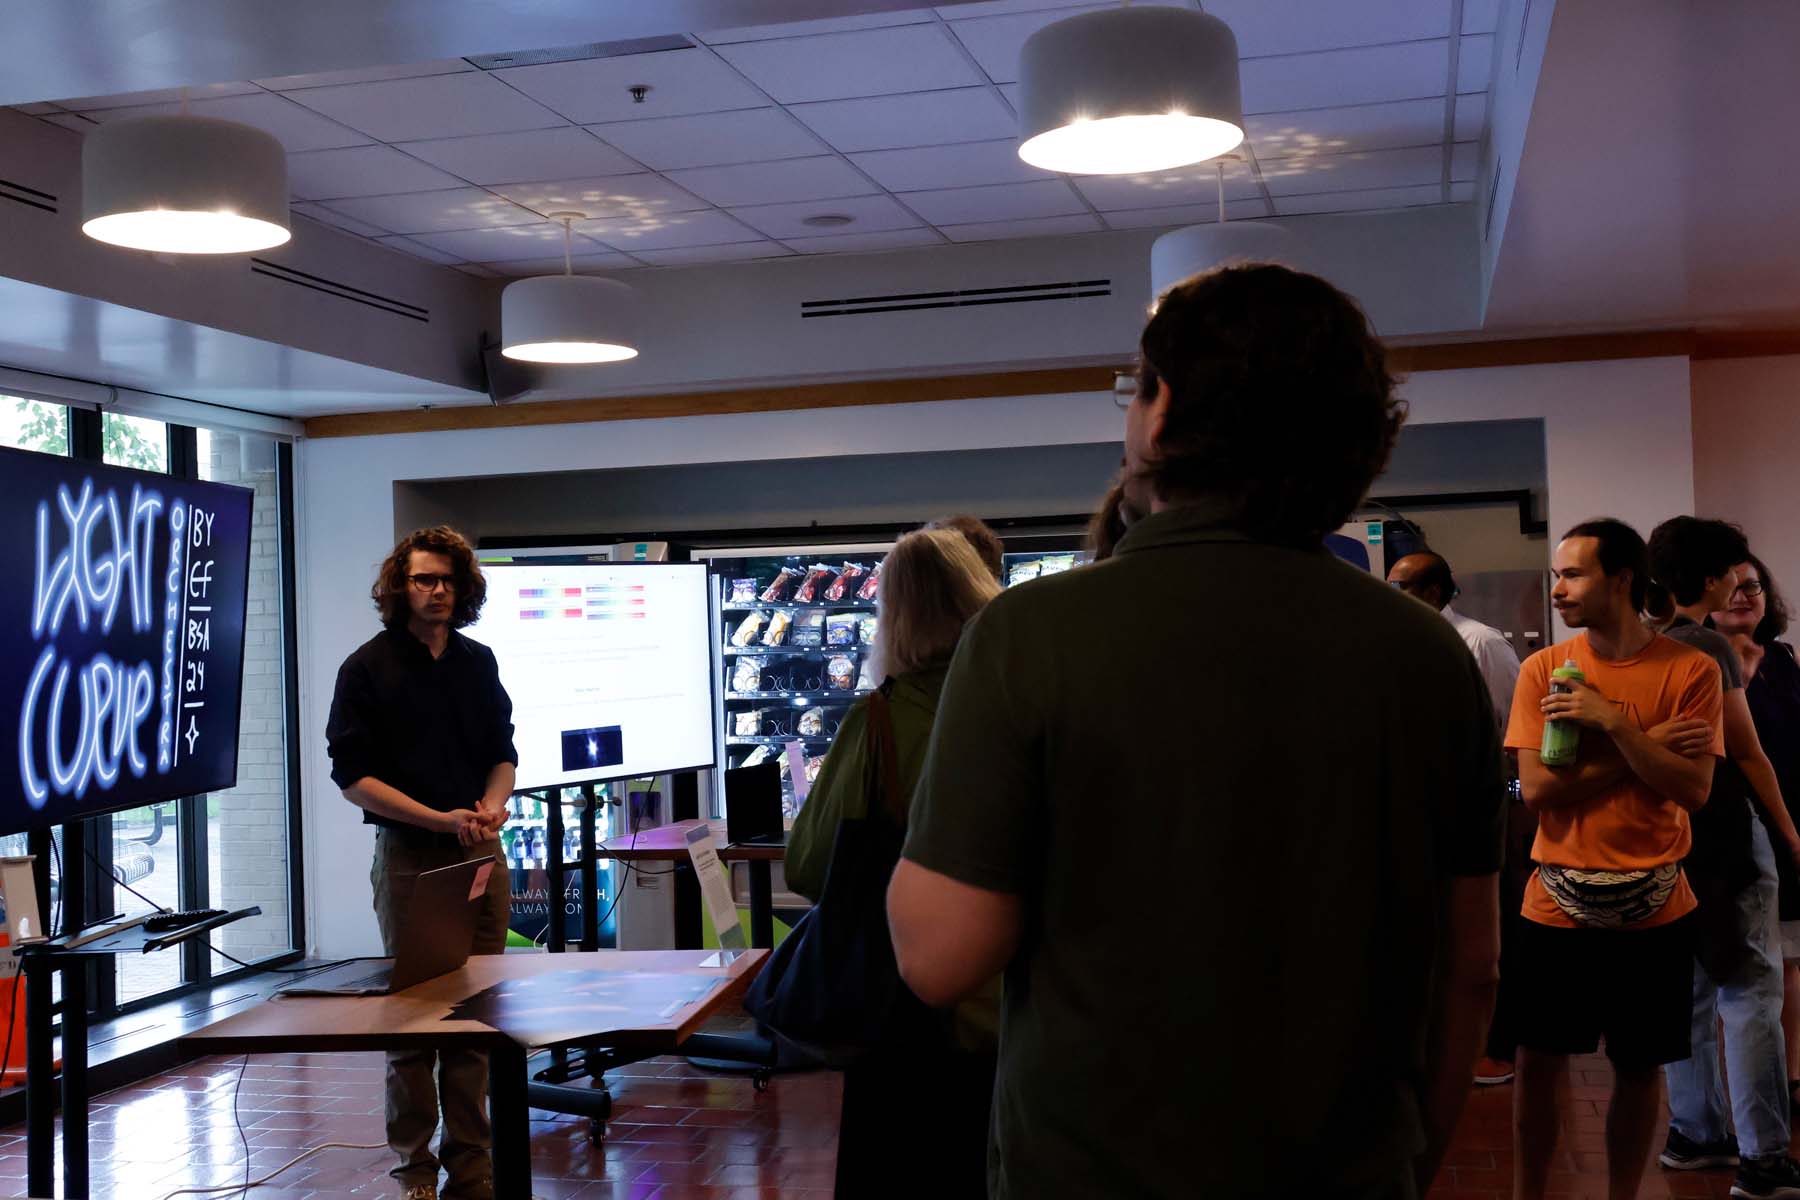 Two student projects are shown on large televisions: one is a website showing spectral data, the other an animation title screen reading "LIGHT CURVE ORCHESTRA".  A student artist stands between them, ready to take questions.